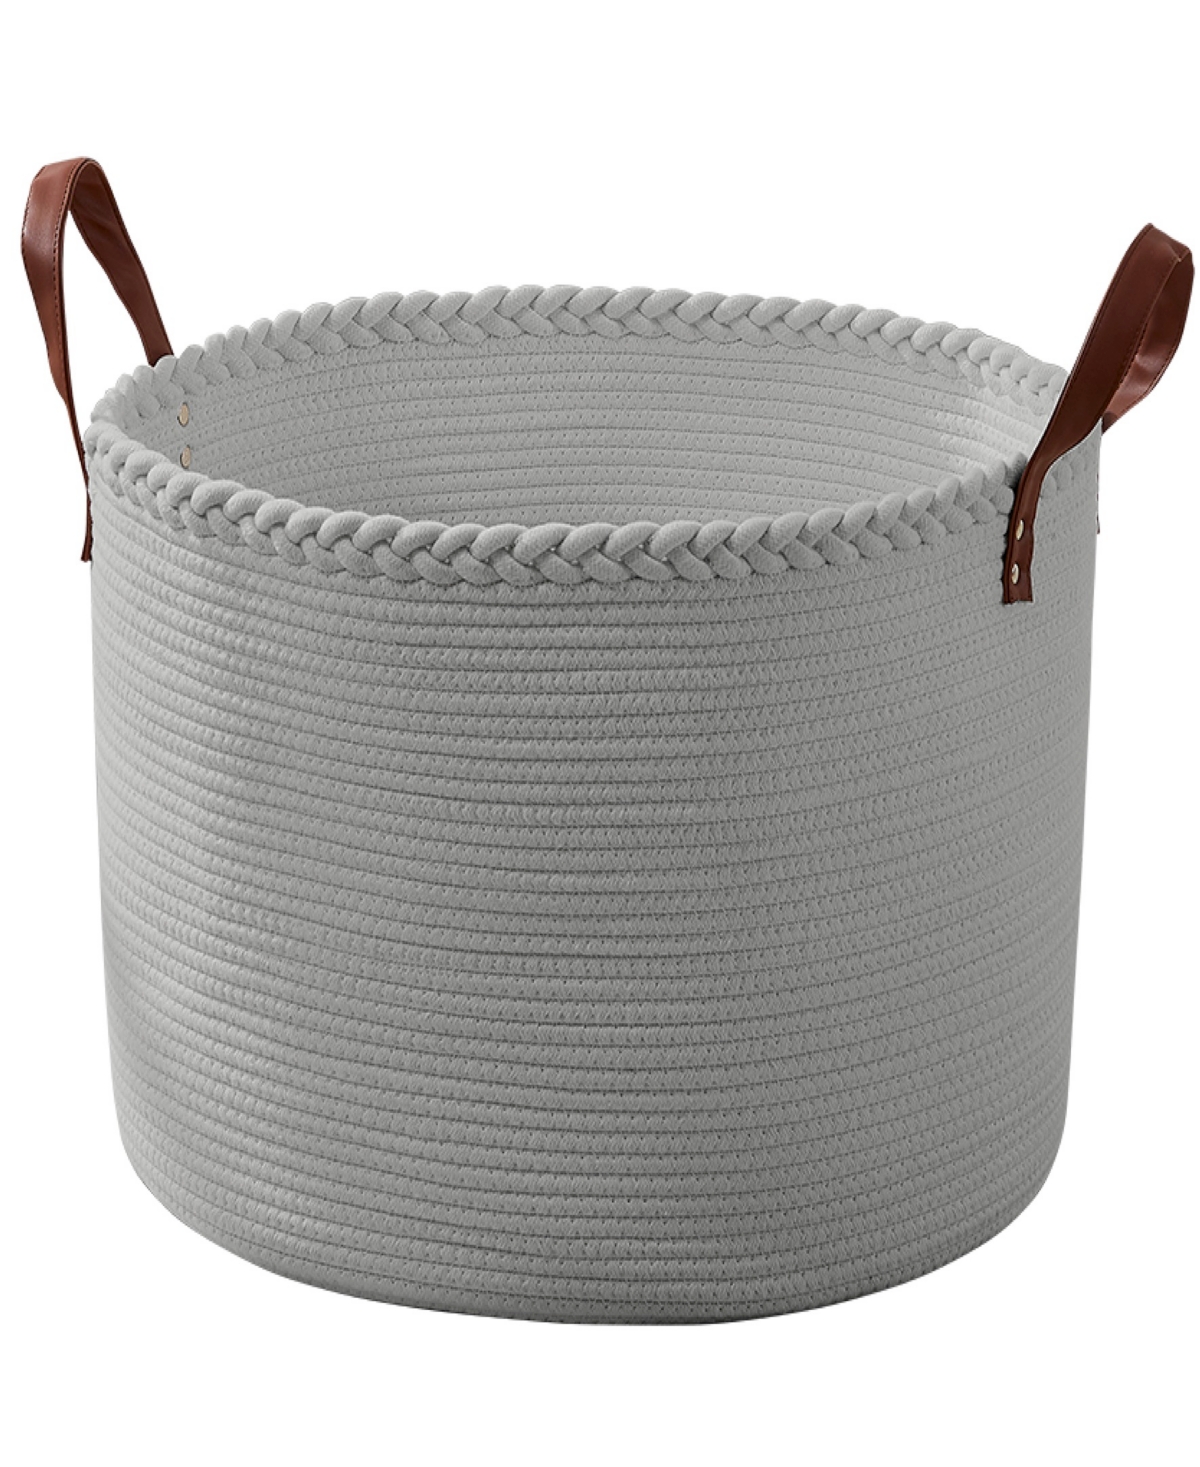 Extra Large Round Cotton Rope Storage Basket Laundry Hamper with Leather Handles - Gray